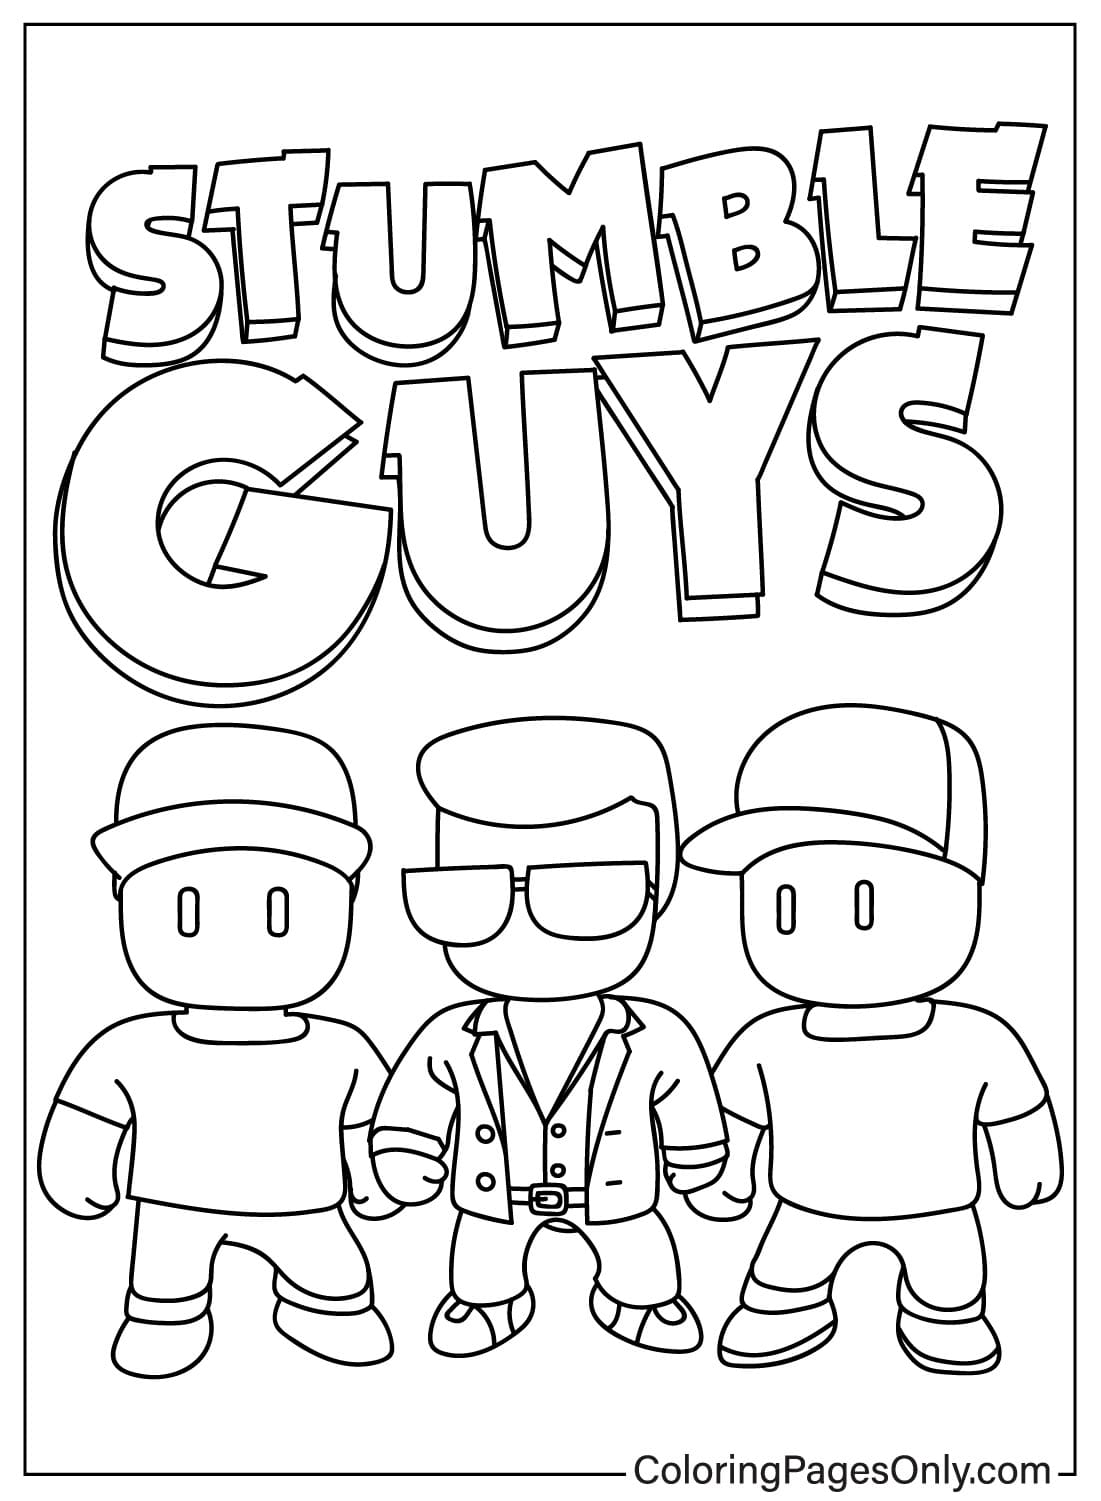 Print Stumble Guys Coloring Page from Stumble Guys